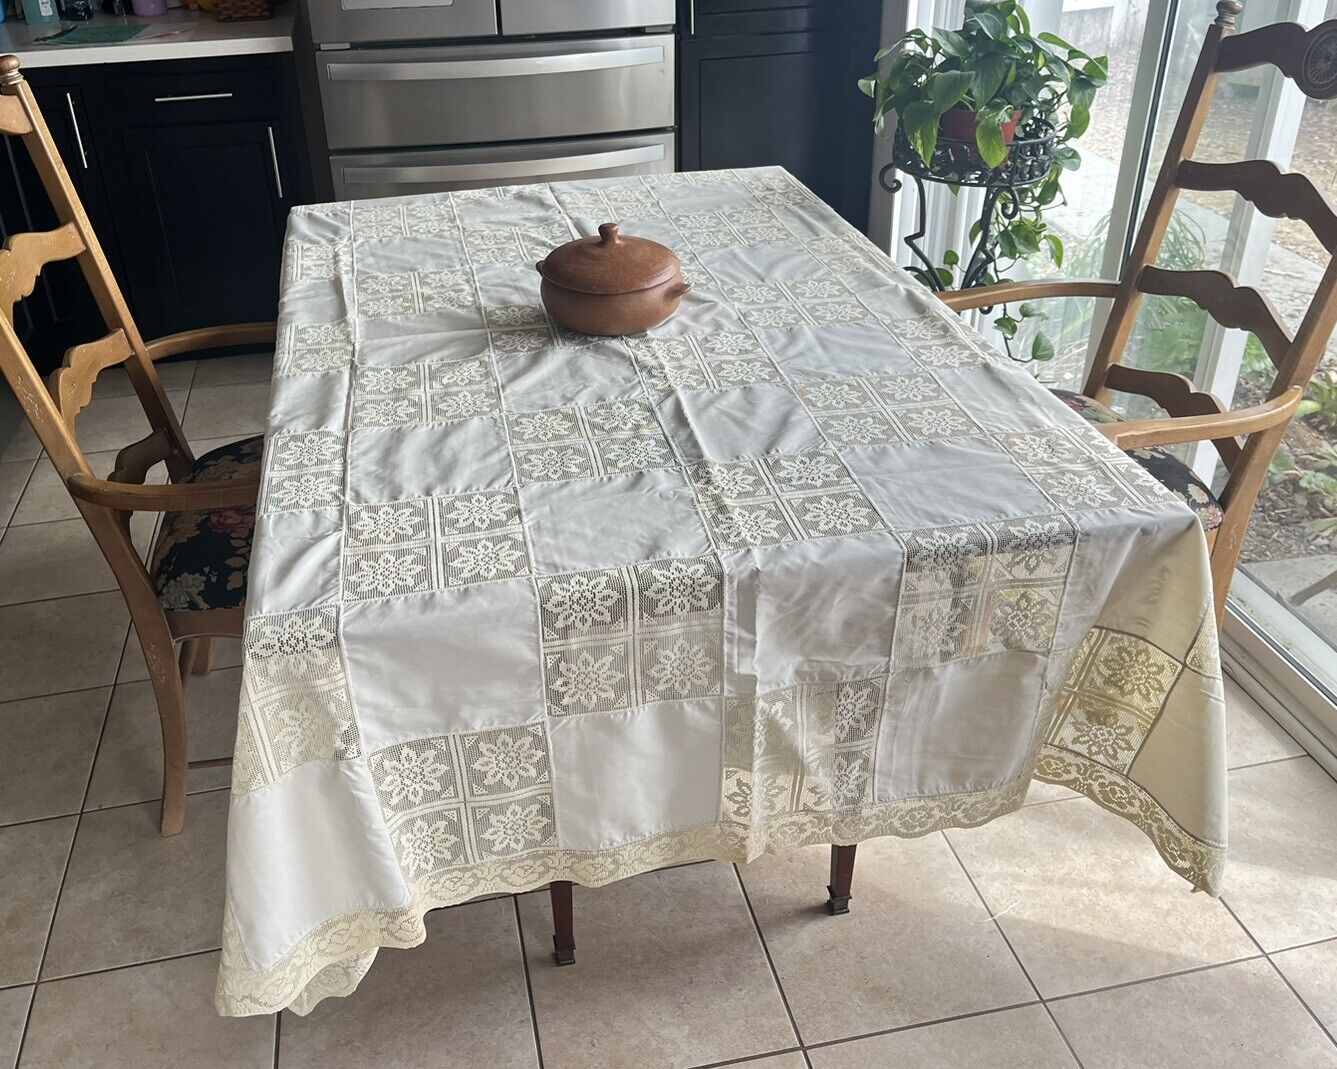 Antique Lace Tablecloth Rectangular Ivory Cream White 88 X 66 French Country